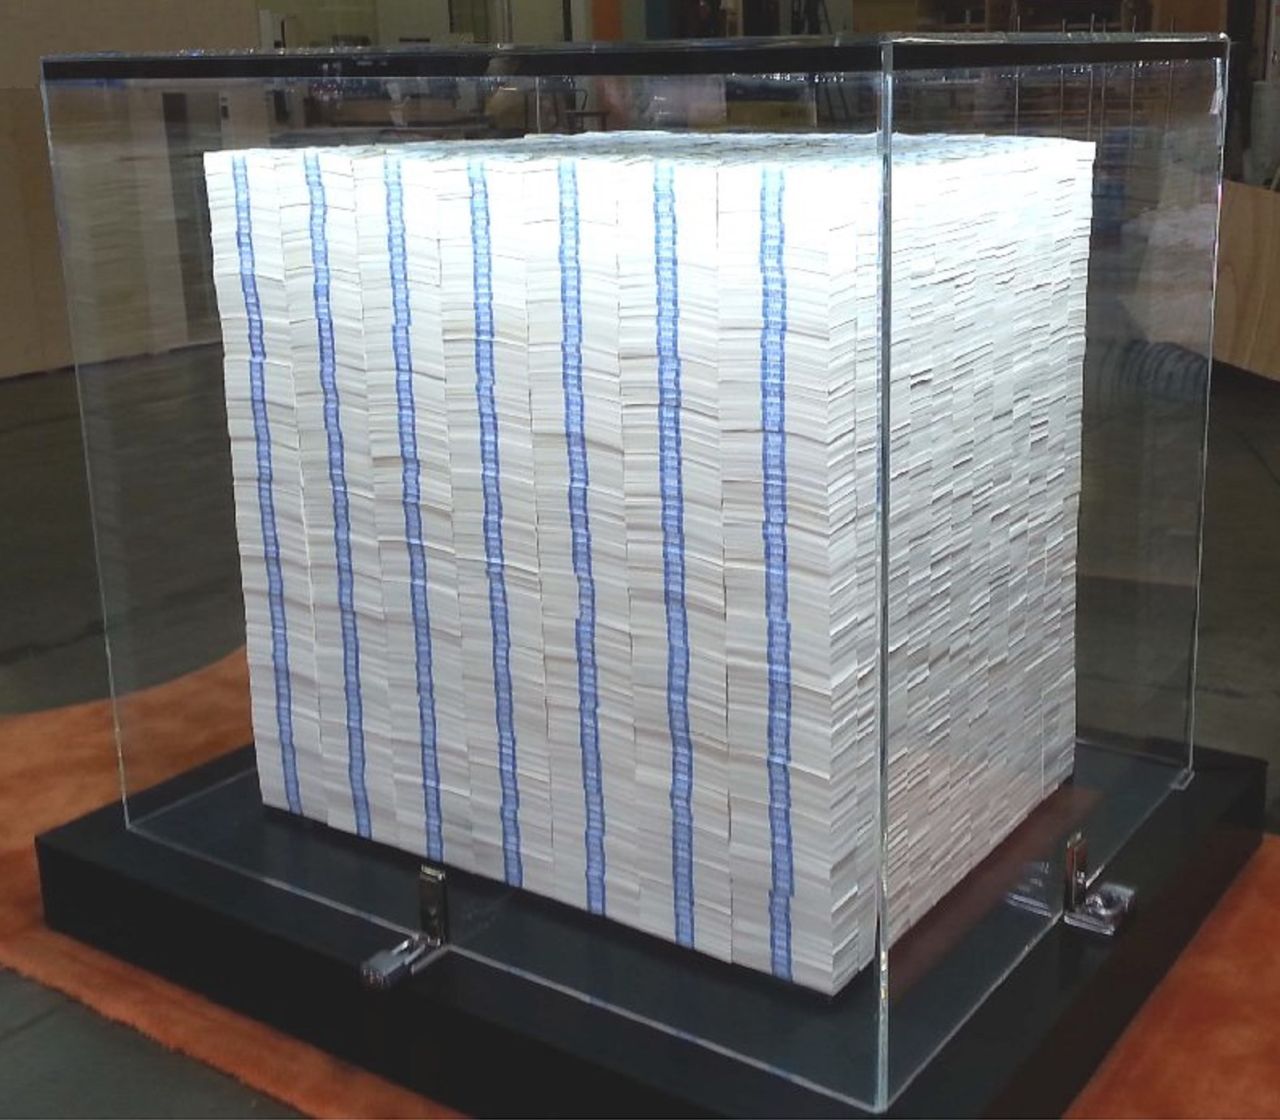 This pallet of money includes more than  3,000 stacks. It weighs 1,000 lbs.